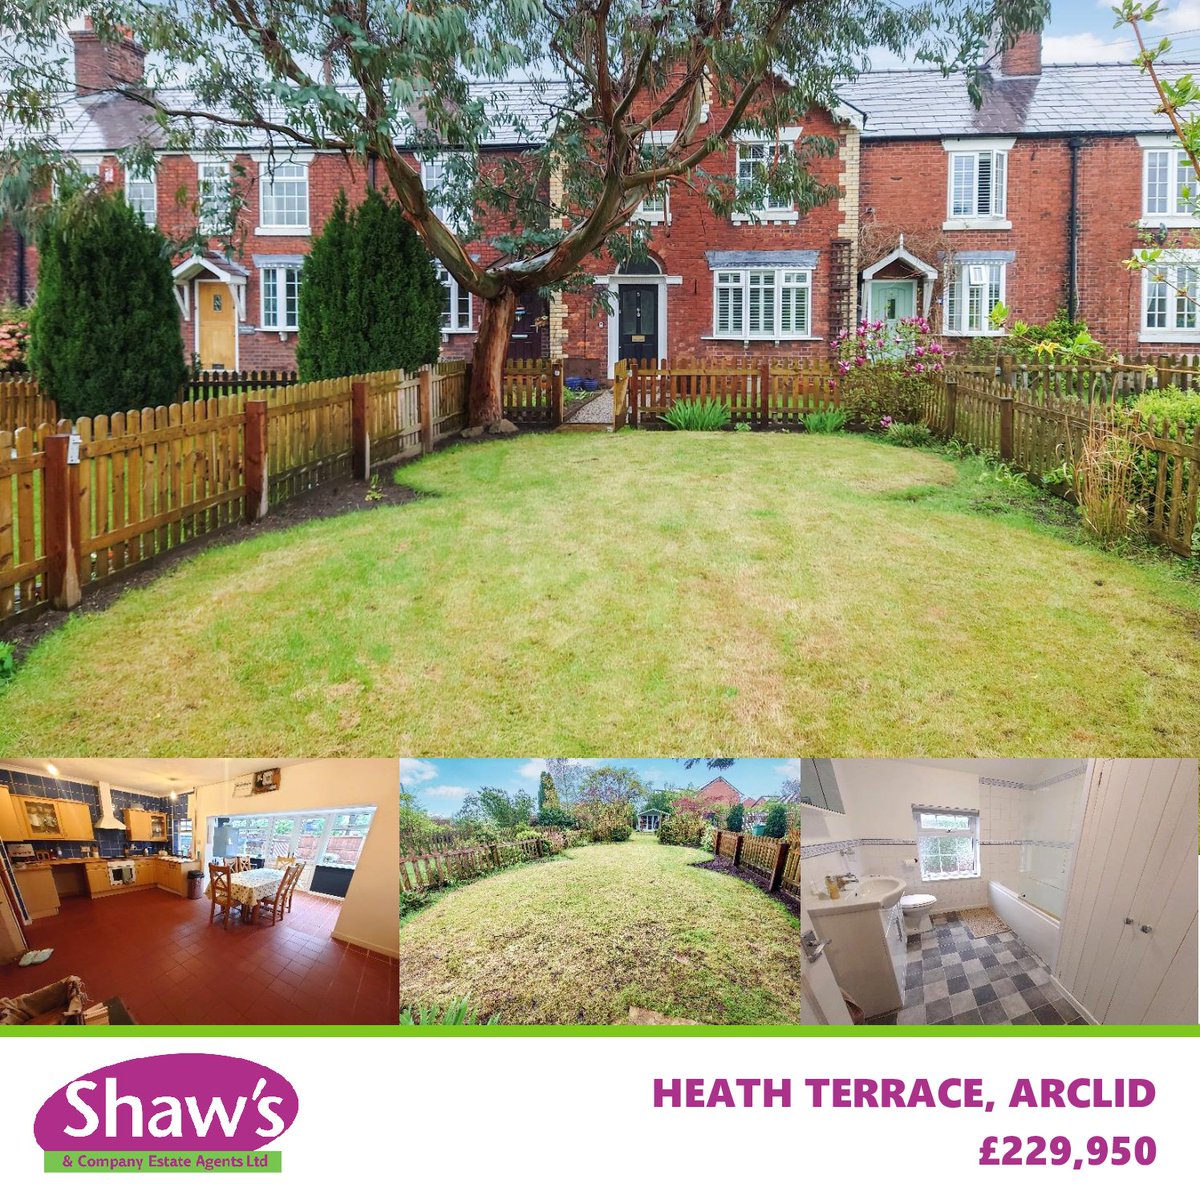 NEW & FEATURED PROPERTIES OF THE WEEK! 

shawsandco.co.uk/news/new-featu…

#shawsandcompany #shawsandco #stoke #stokeontrent #cheshire #newcastleunderlyme  #kidsgrove #biddulph #mowcop #packmoor #mowcop #cloughhall #talke #arclid #tunstall #halmerend #audley #bignallend #harriseahead